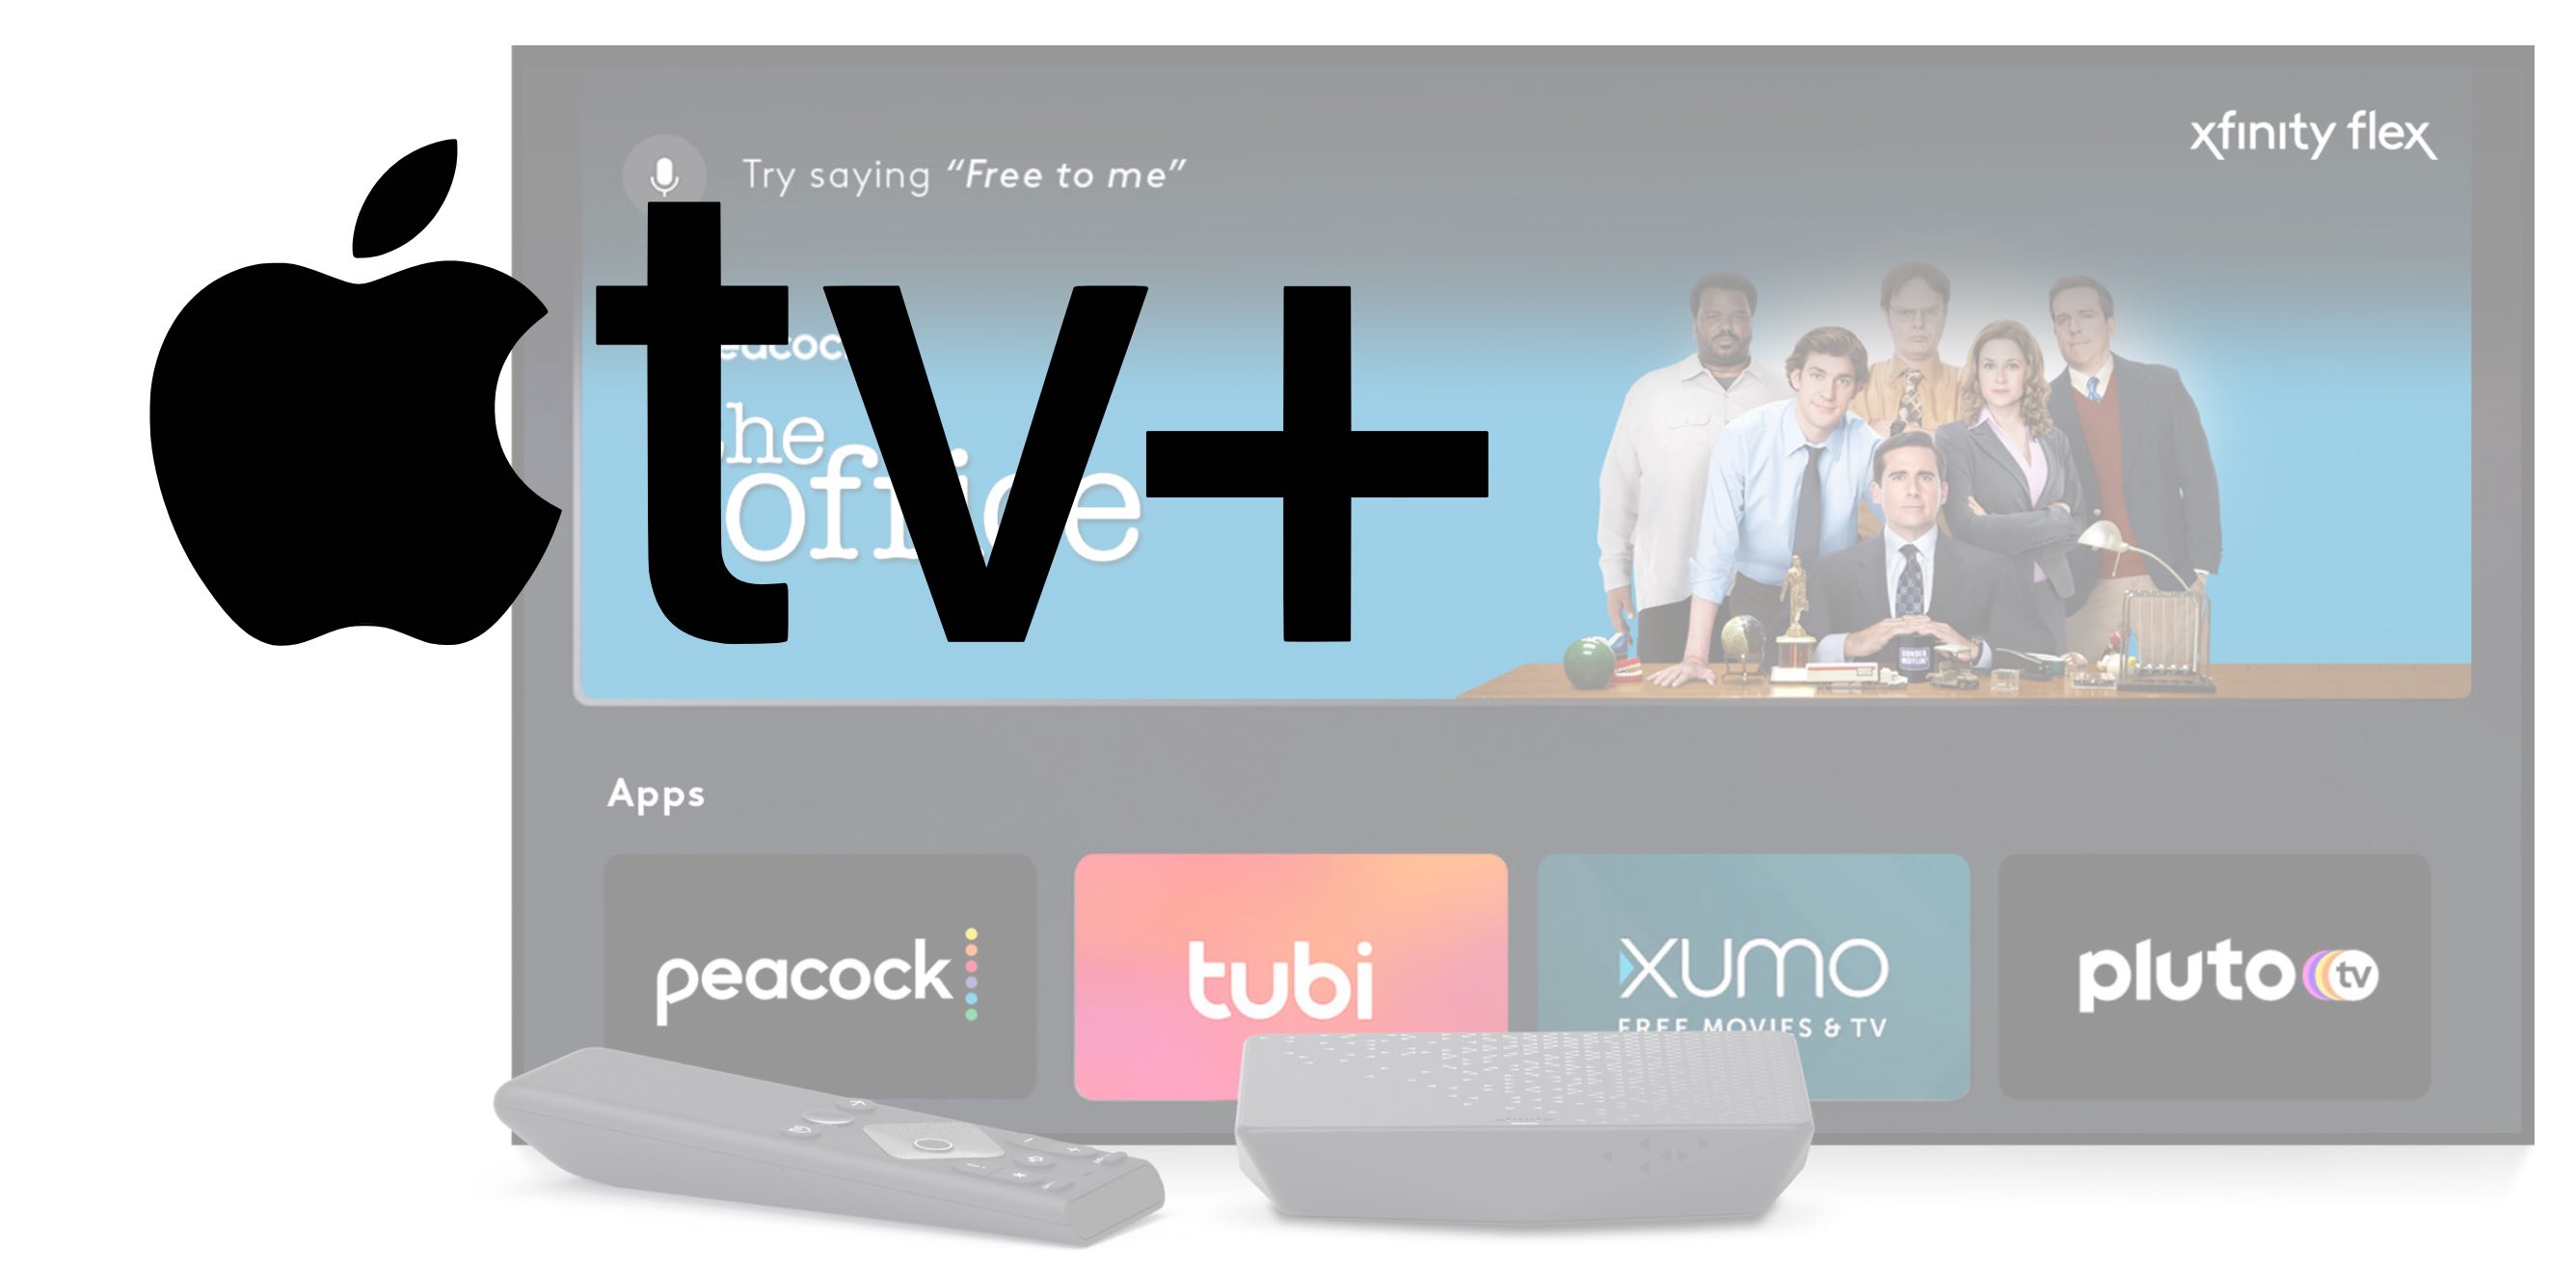 Apple TV app to launch on Xfinity, Sky Q, and other Comcast platforms, expanding Apple TV+ reach